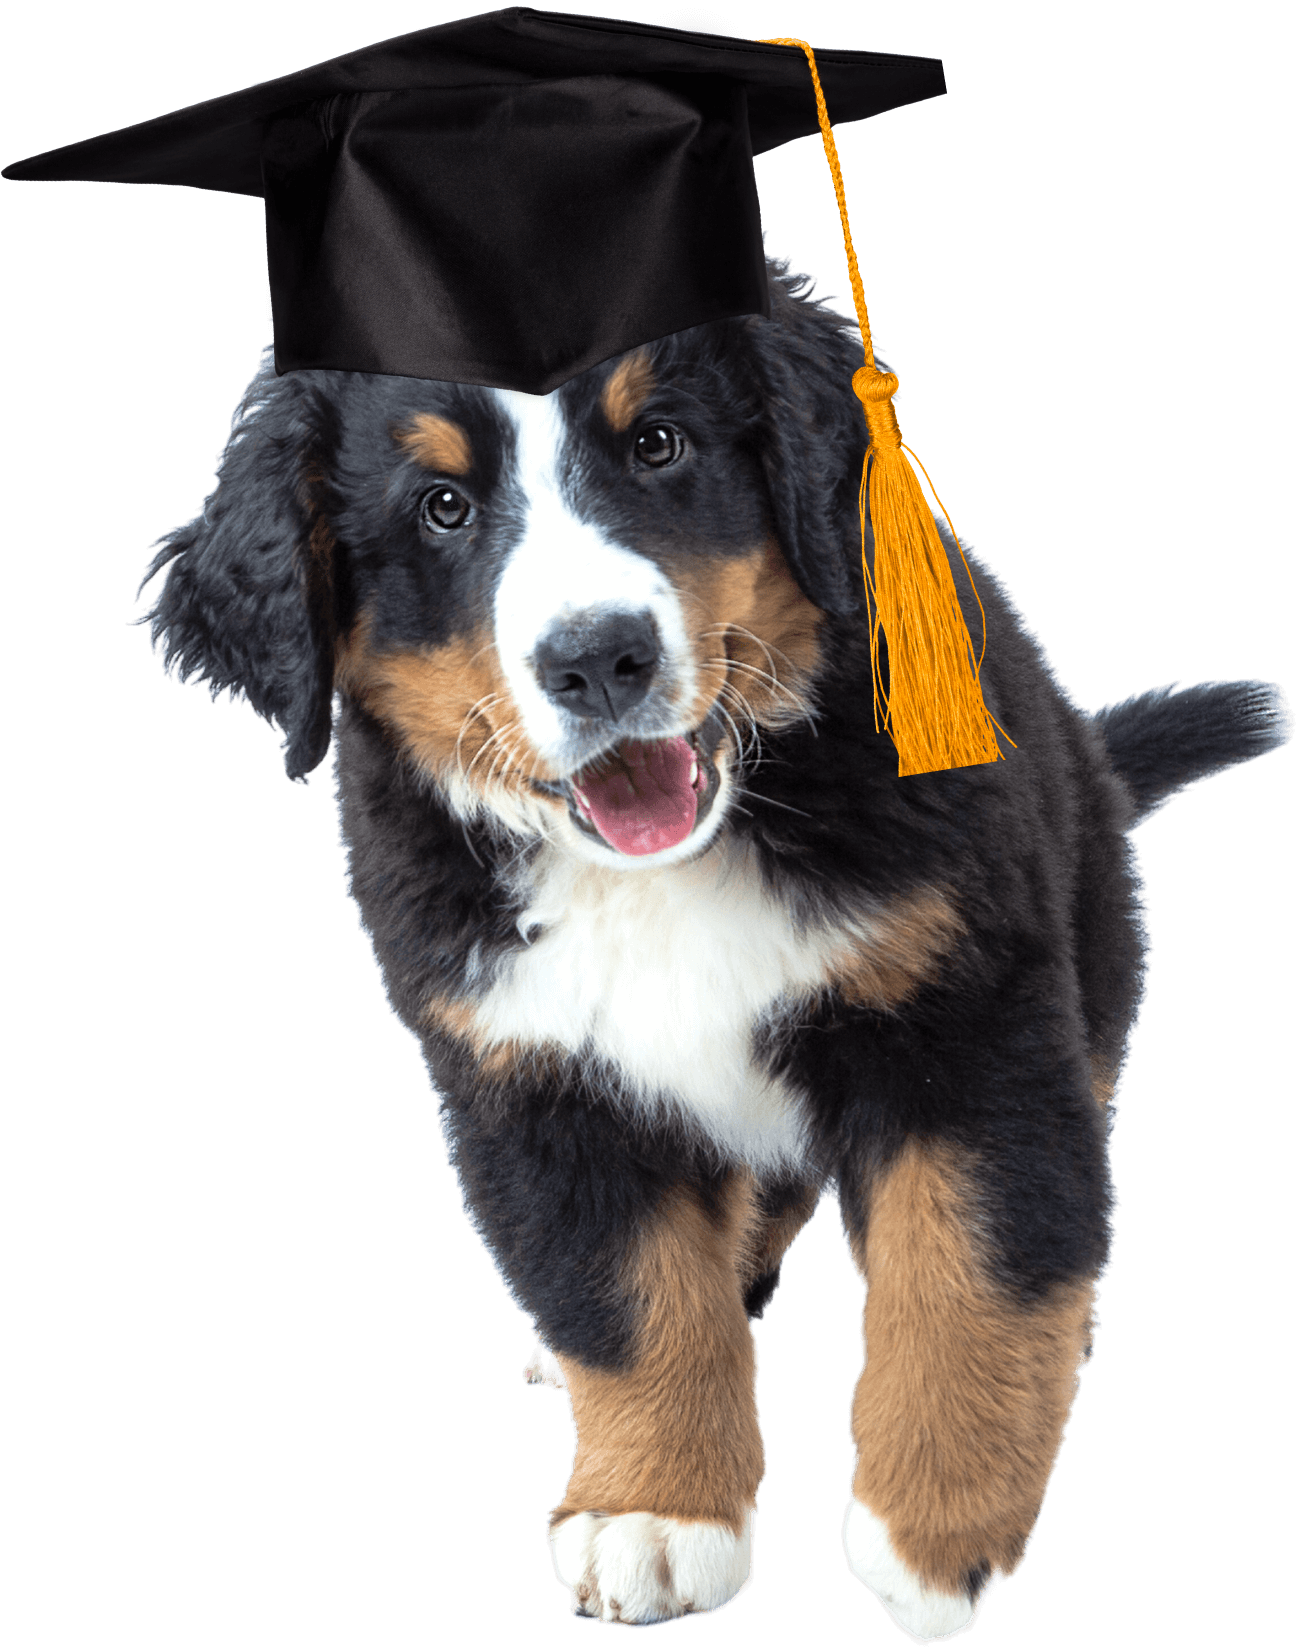 A dog wearing a graduation cap and gown.